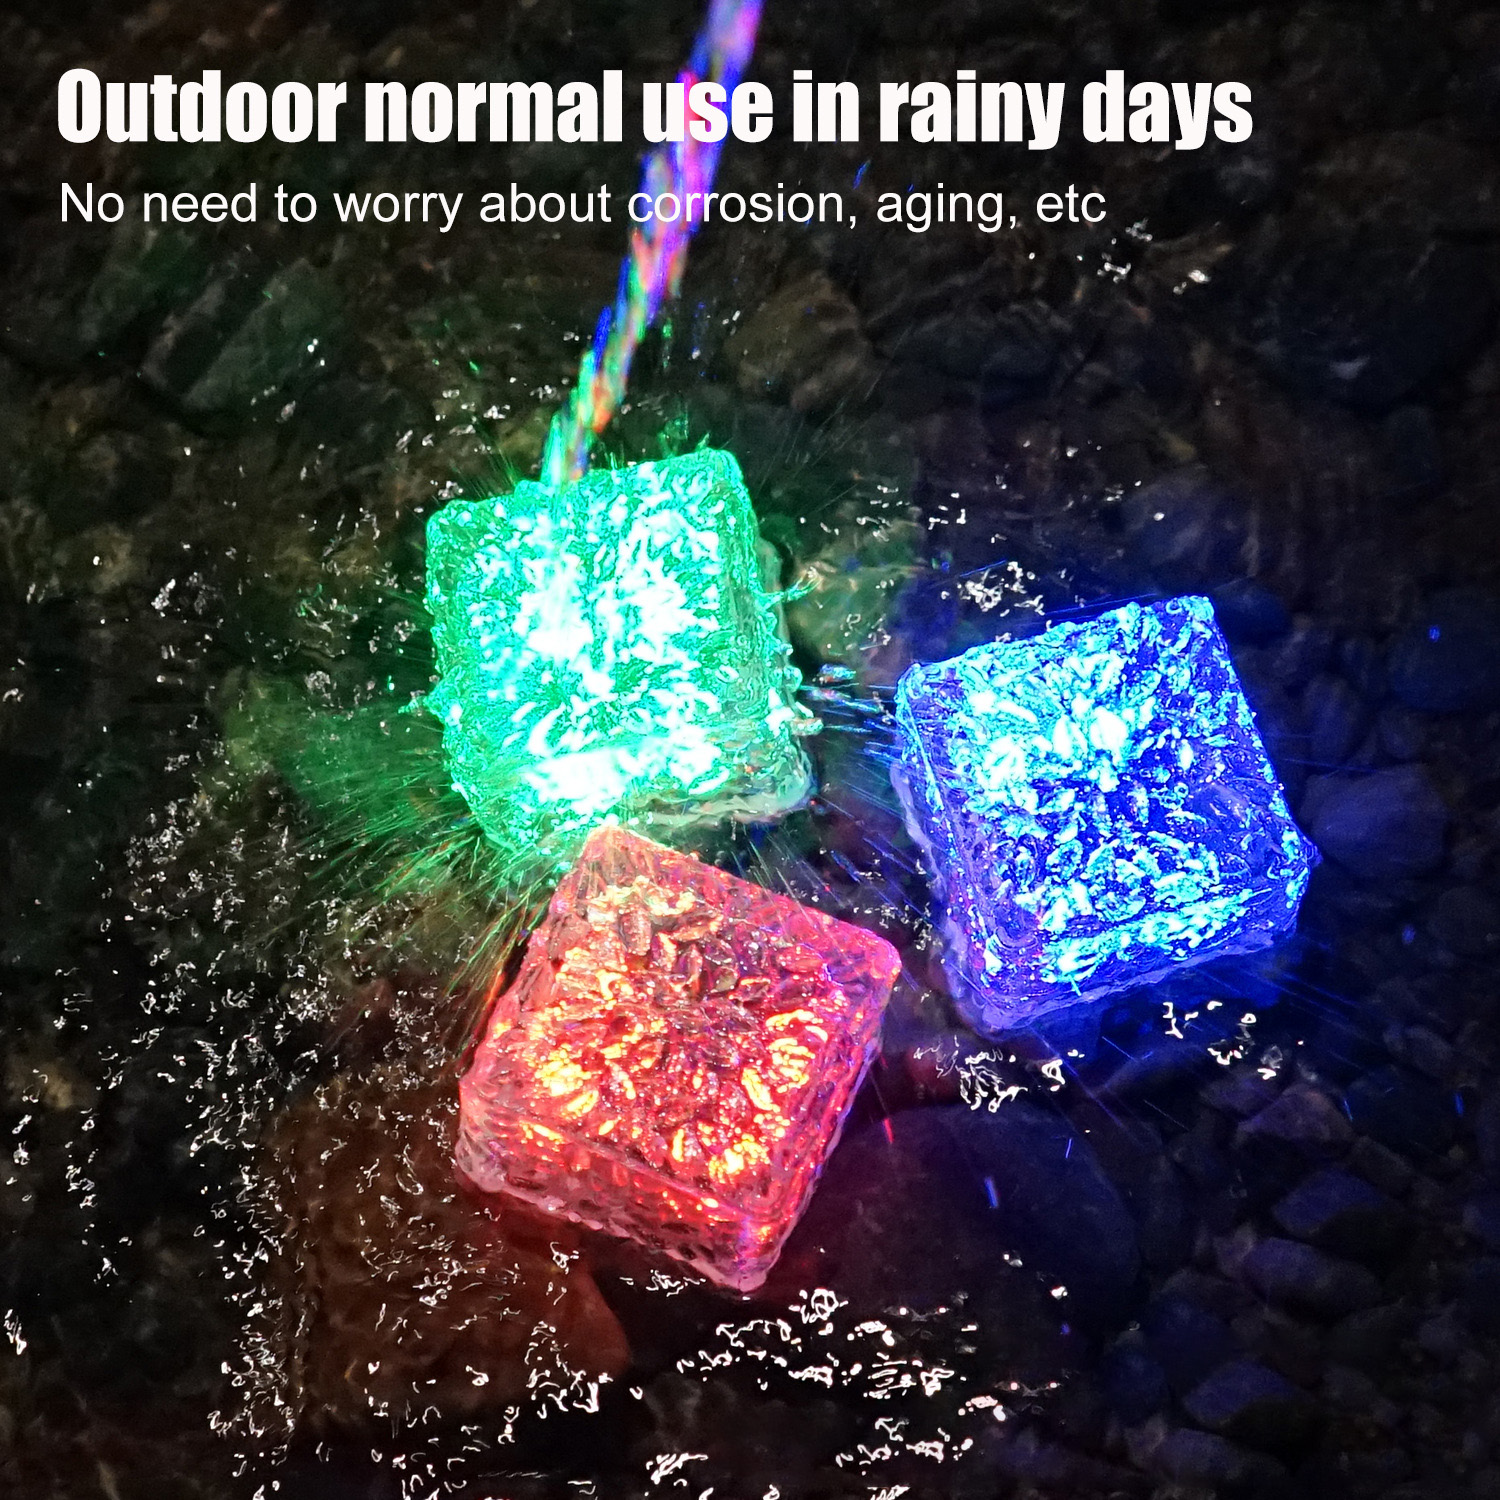 2022 Latest Outdoor Waterproof Solar Ice Brick Square Lamp For Home Festival Party Pathway Walkway Decoration